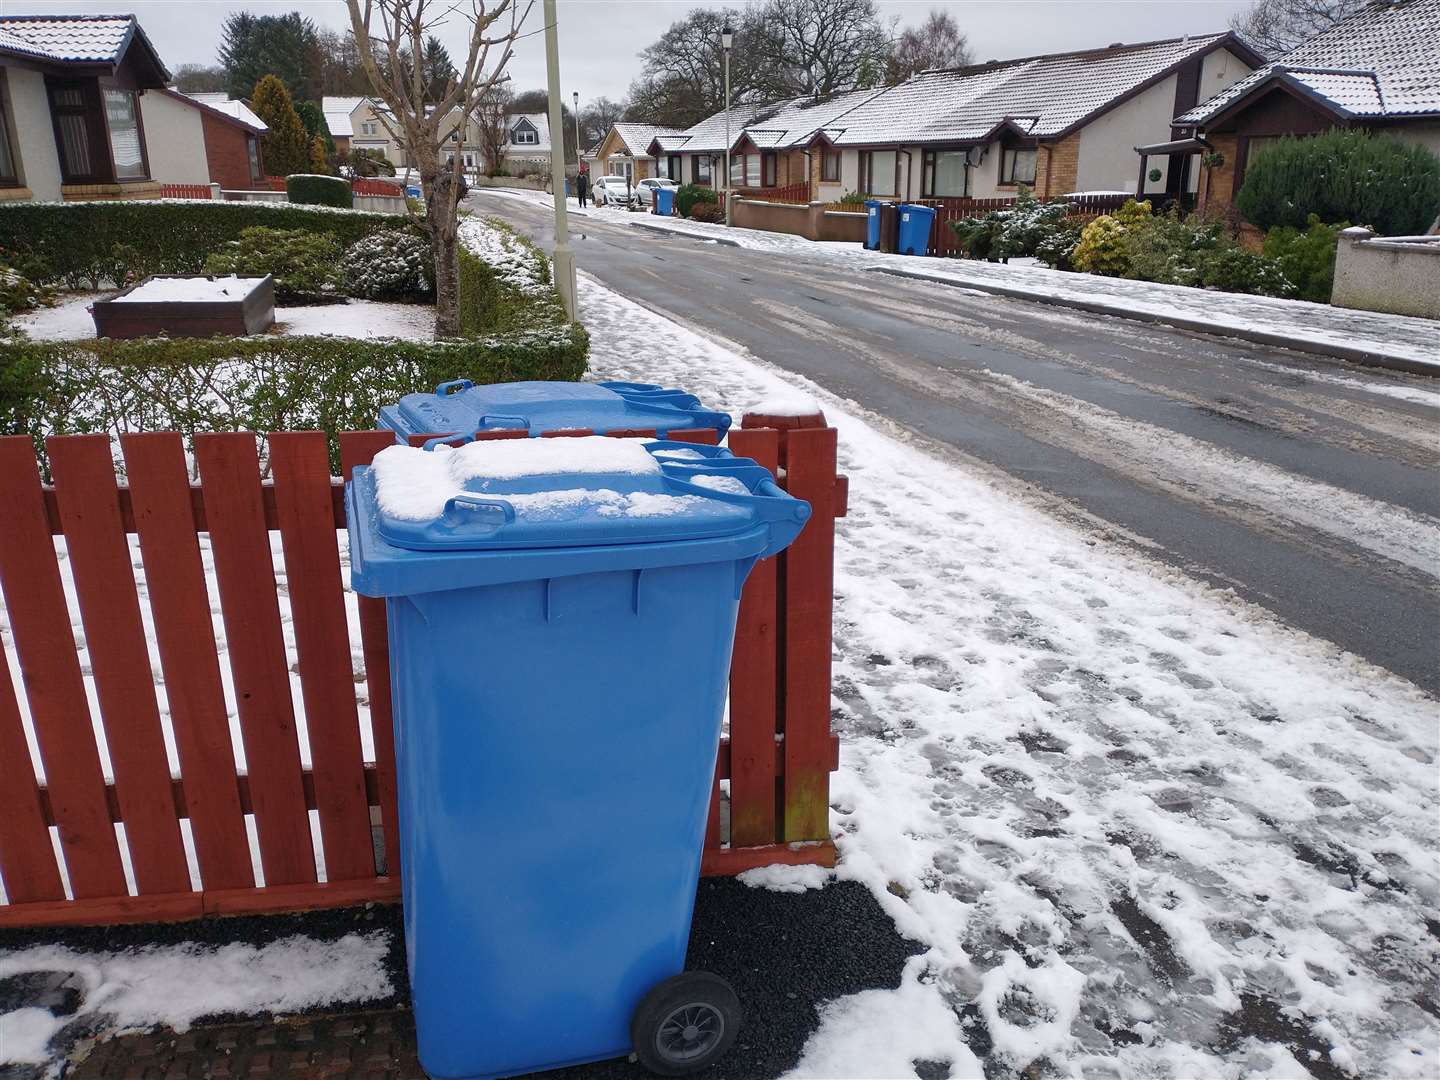 The recycling bin service in parts of the Cradlehall area of Inverness was hit by the weather.